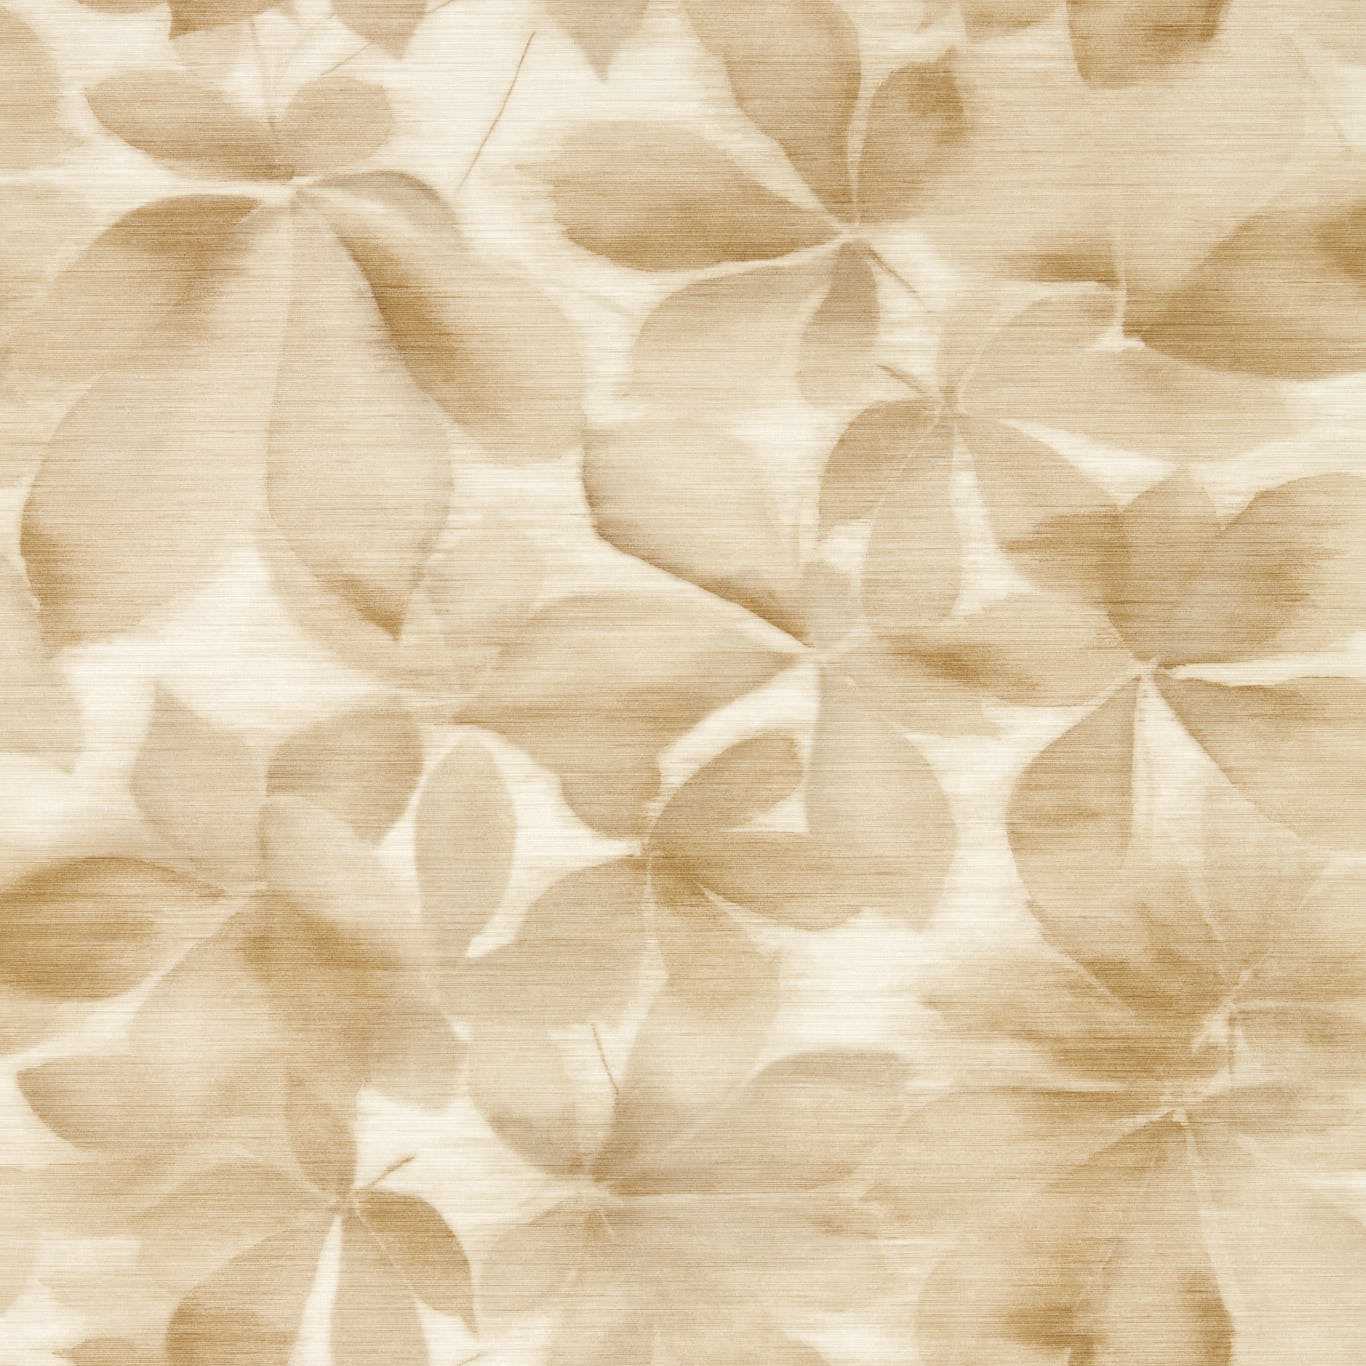 Grounded Golden Light/Parchment Wallpaper by HAR